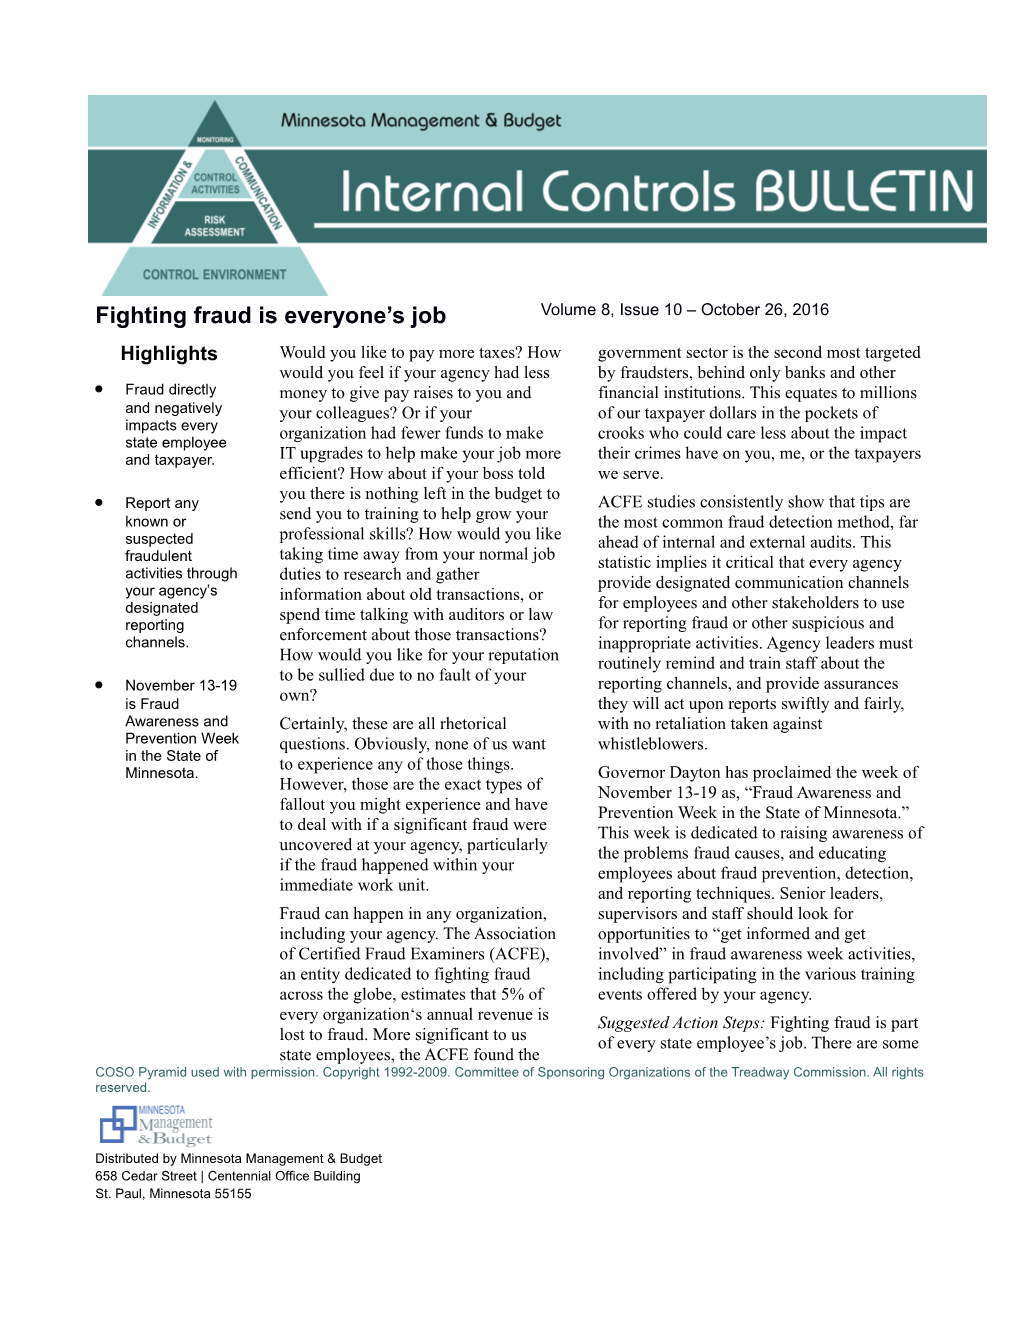 October 2016 Internal Control Bulletin - Fighting Fraud Is Part of Every State Employees Job